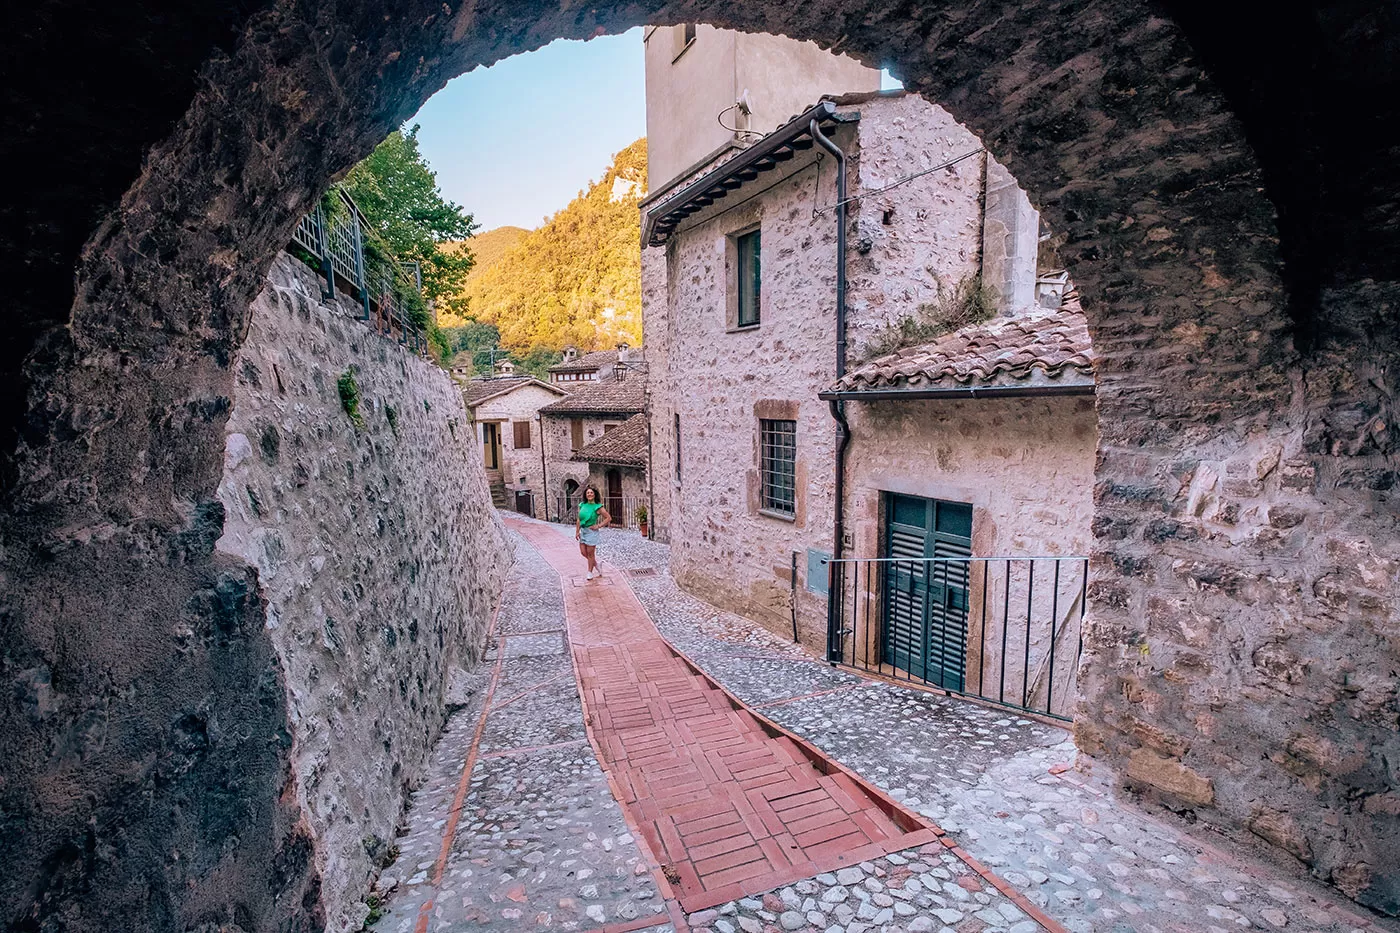 Things to do in Umbria Italy - Arch and alley in Scheggino 2